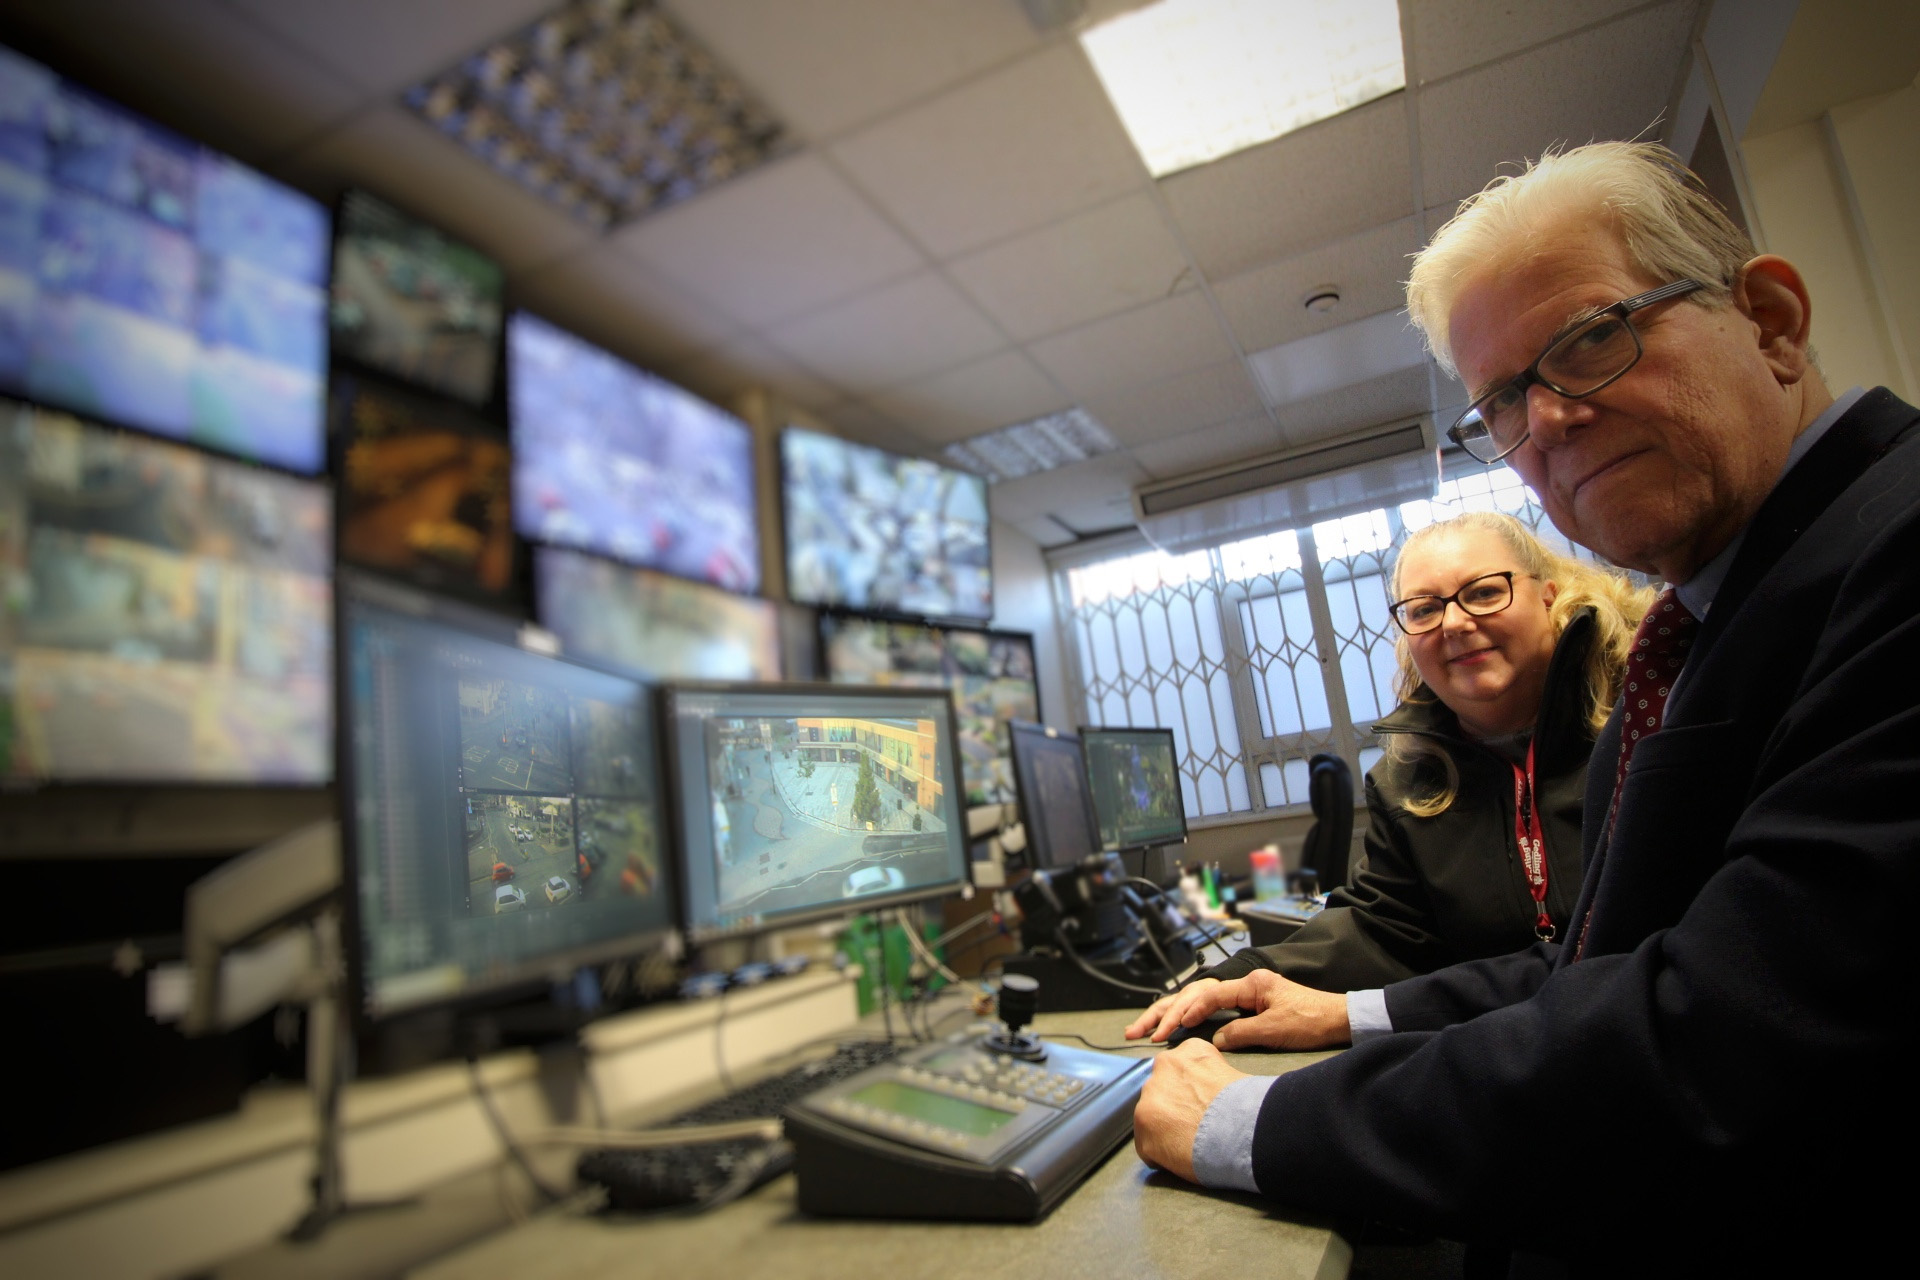 John Clarke MBE in the council CCTV Control Room. Monitors and controlls are on the left hand side with screens blurred out. Cllr John Clarke MBE and Council Officer are sat on the right side looking at the camera.